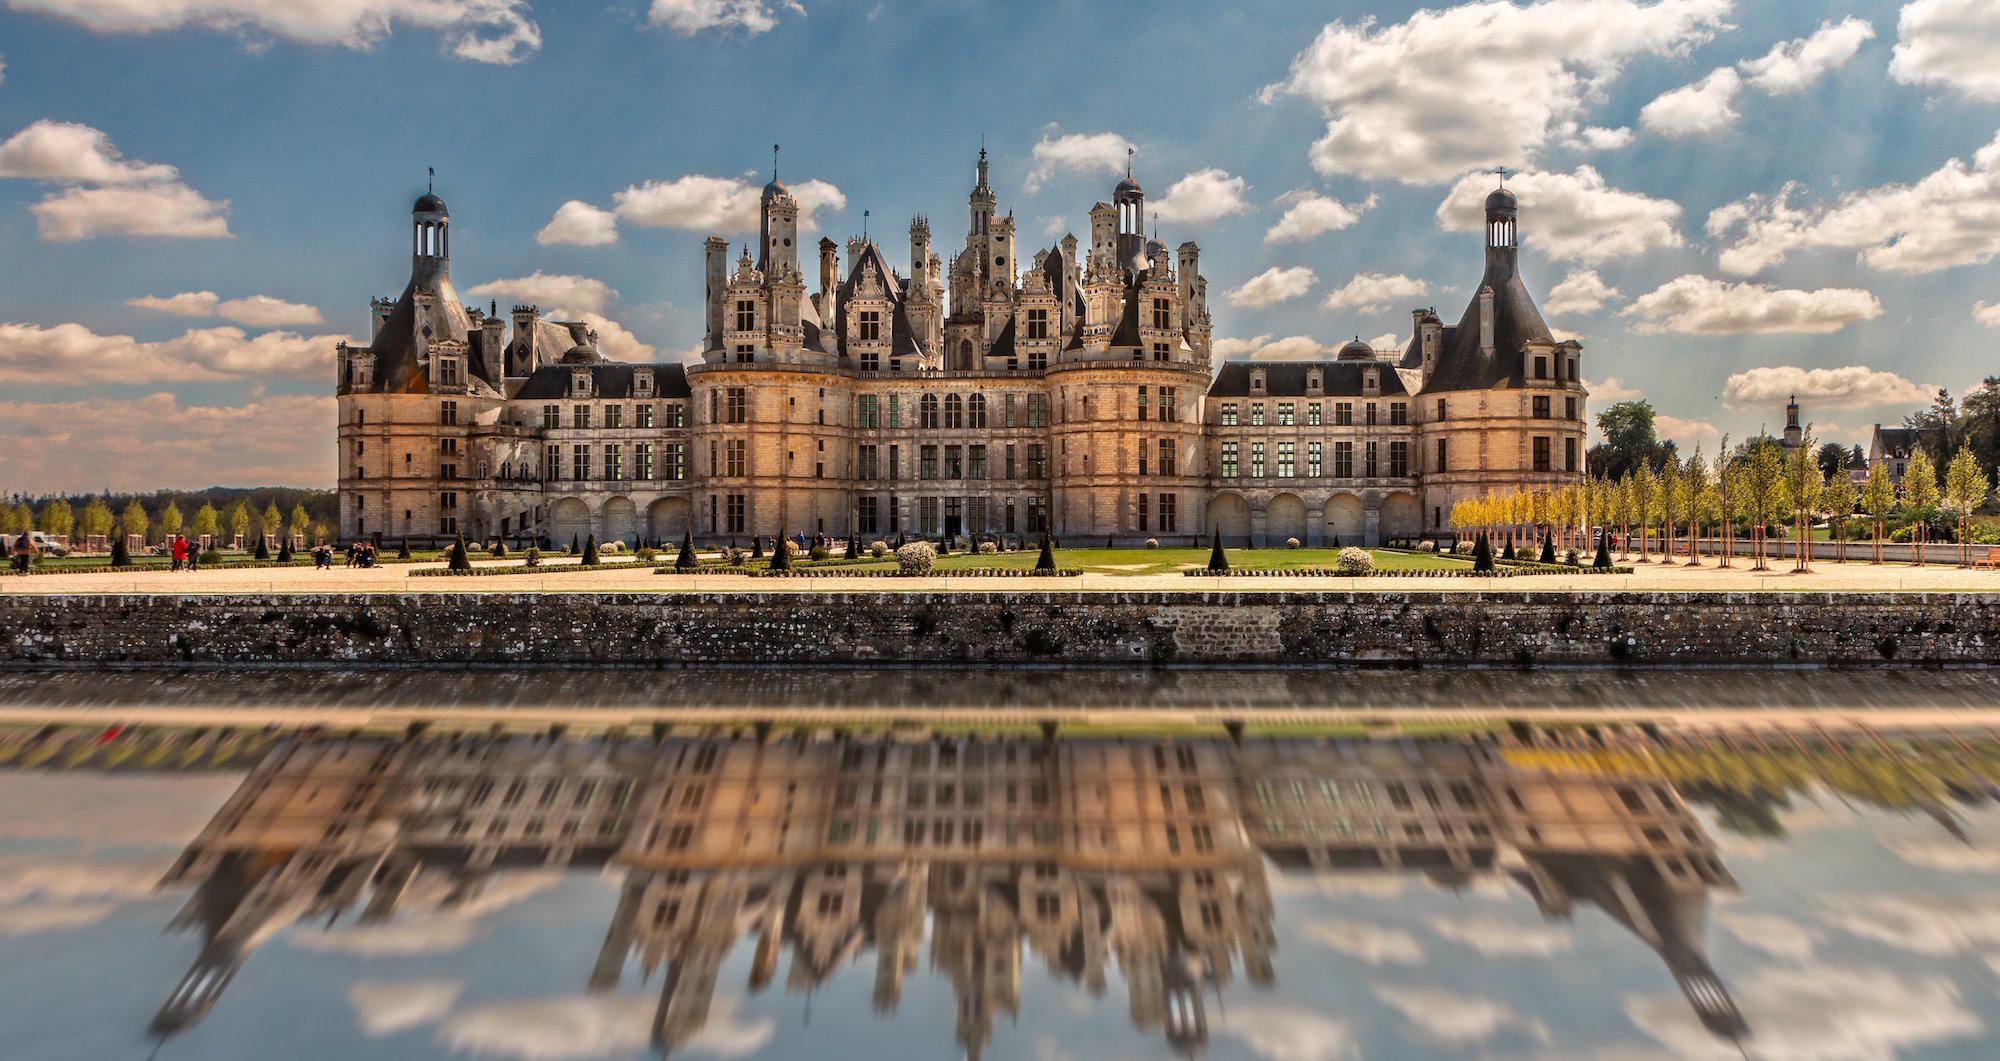 Chateau De Chambord The Most Popular Castle In The Loire Valley. 